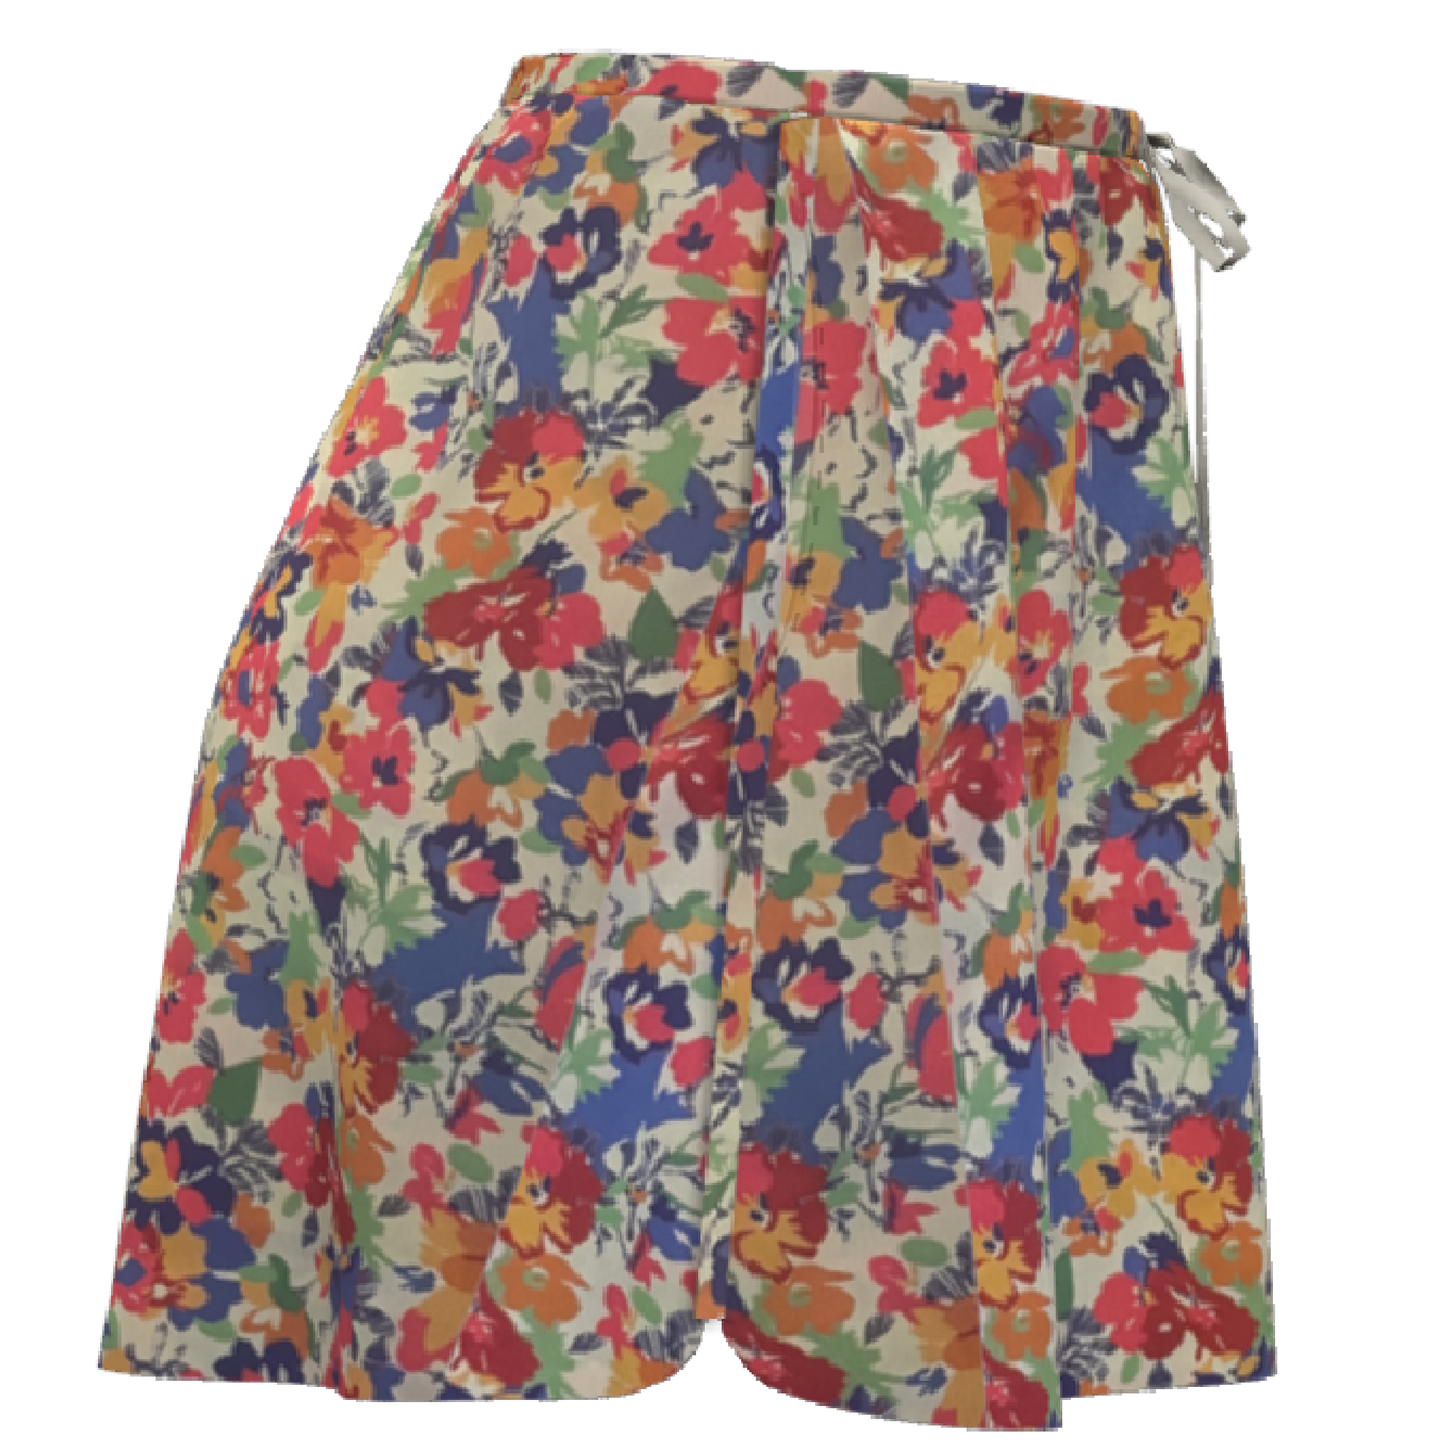 Taylor Pocket Skirt: Paint the Town Floral